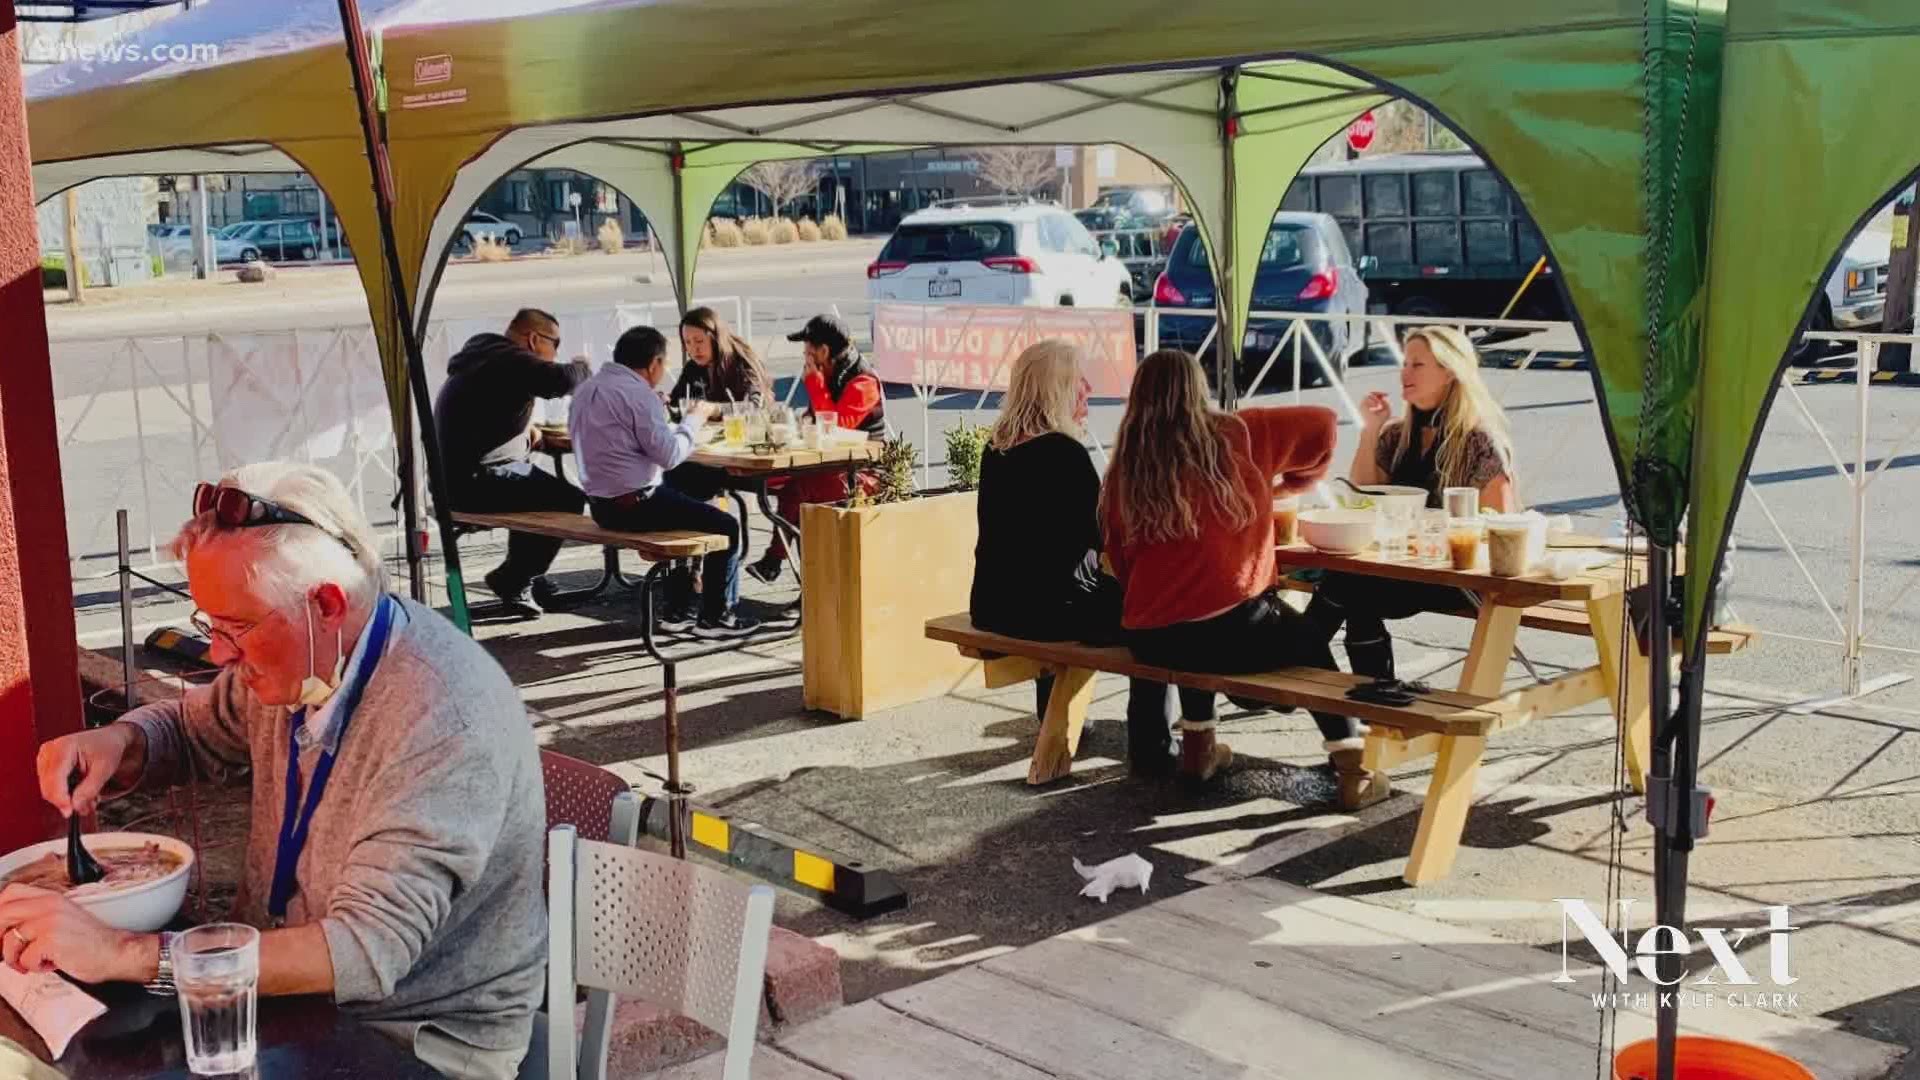 Data from the city shows many restaurant owners in under-served communities didn’t have the same opportunity to expand to public spaces as their counterparts.